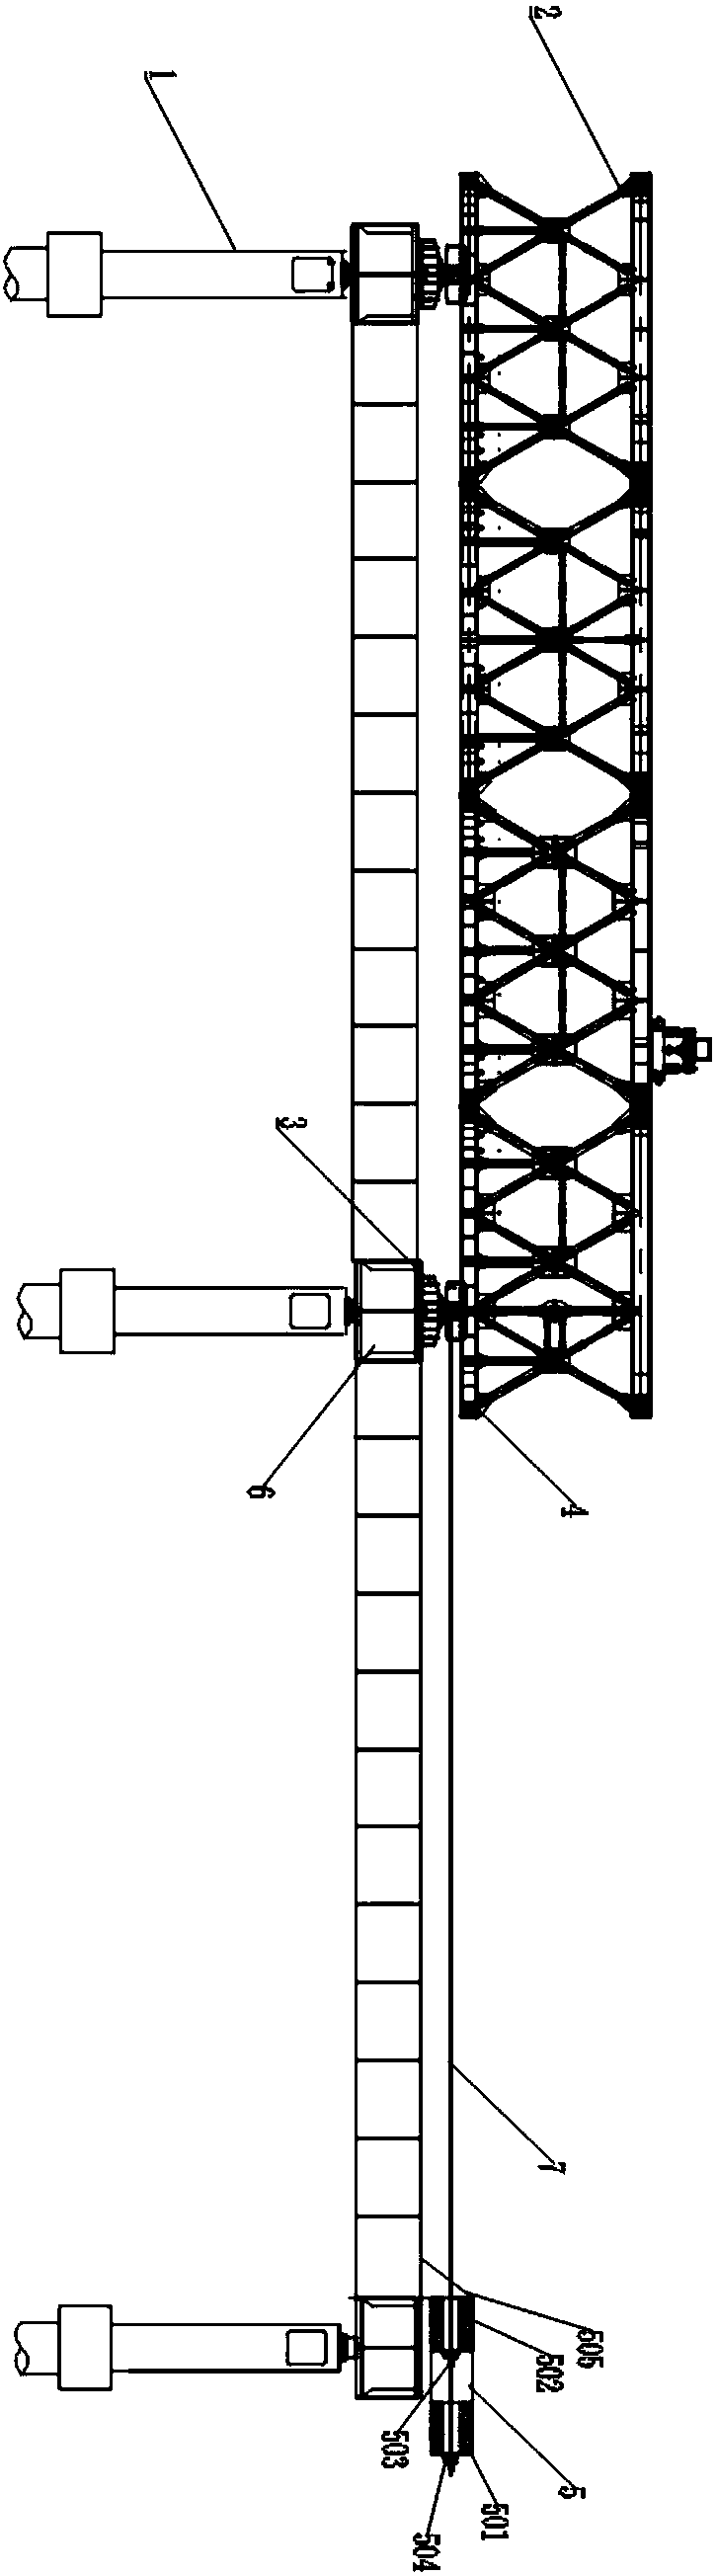 Dragging device and construction method of large steel beams based on finely rolled deformed steel bars and continuous hydraulic jacks